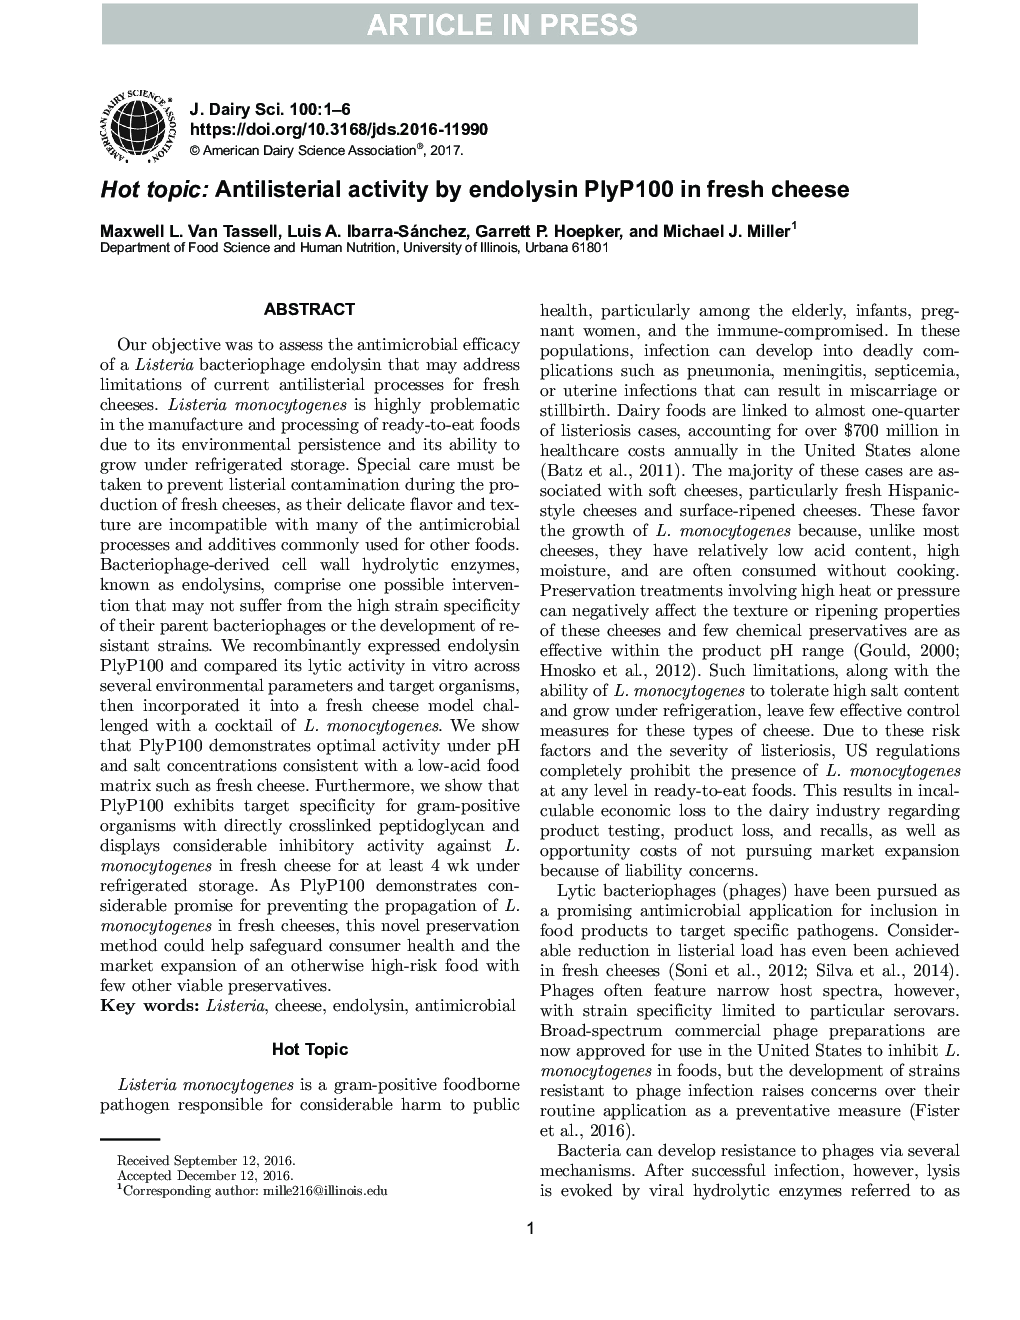 Hot topic: Antilisterial activity by endolysin PlyP100 in fresh cheese